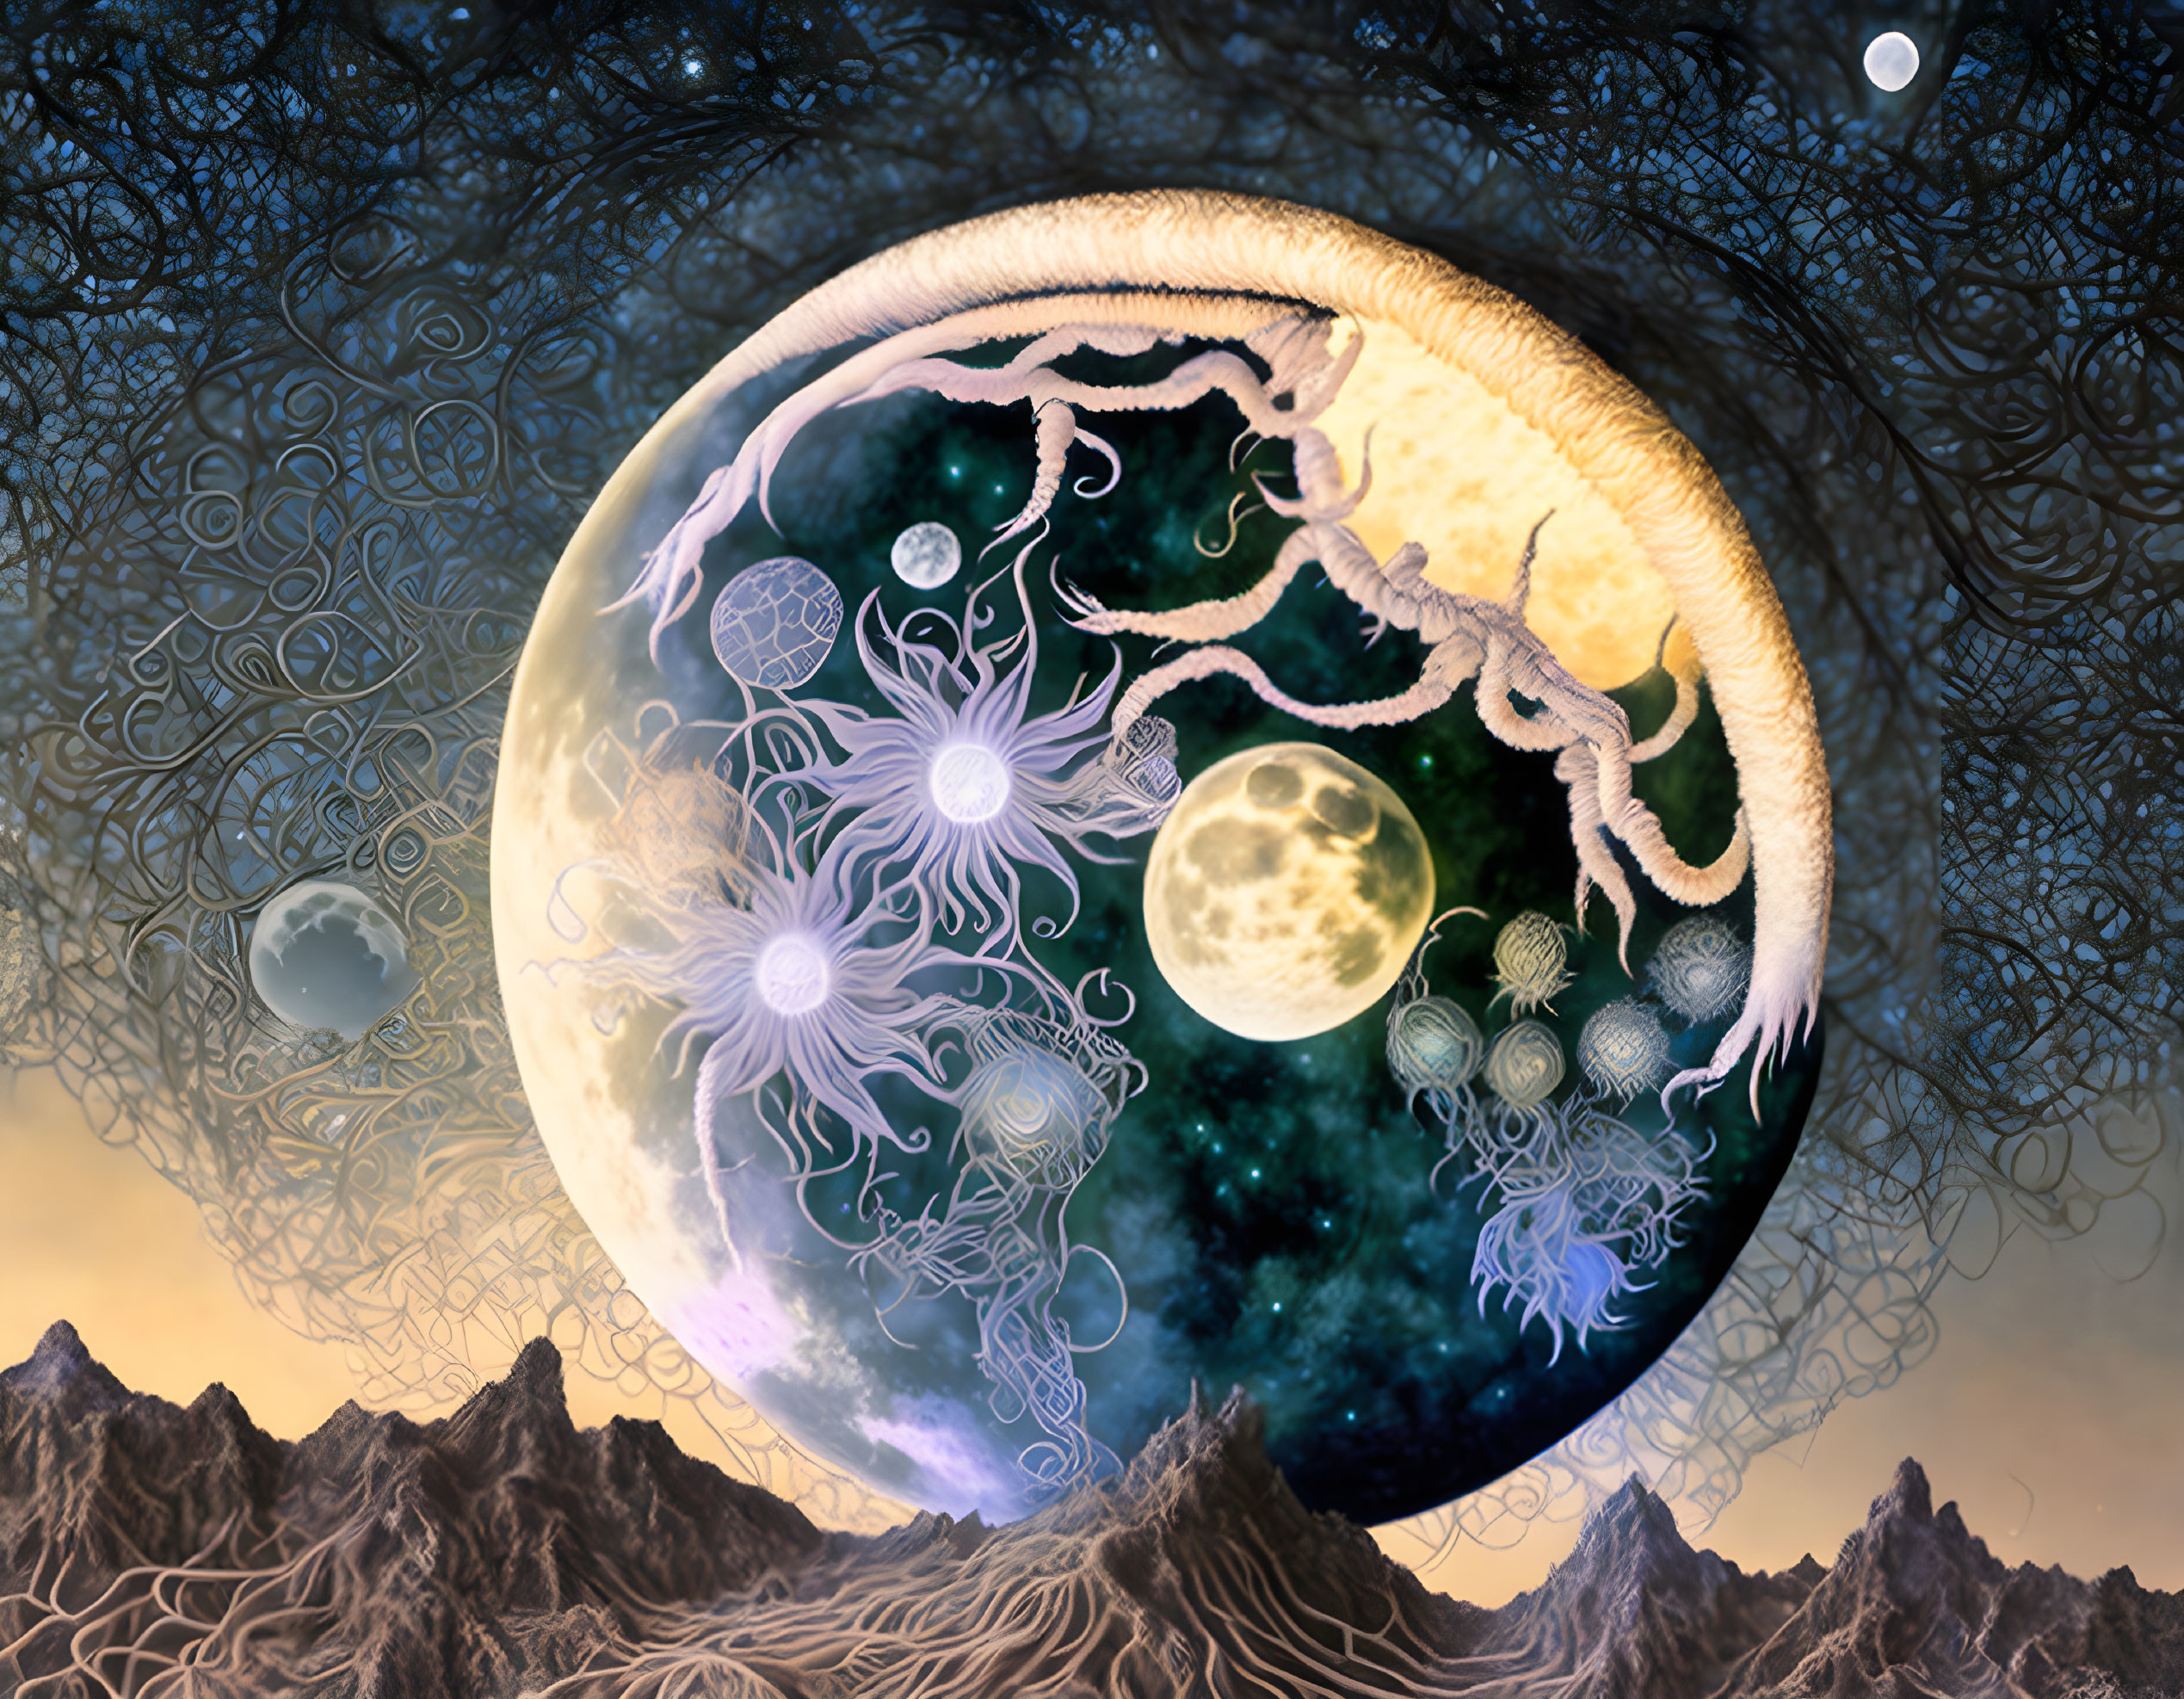 Surreal cosmic scene: large moon, tree-like structures, jellyfish, starry sky,